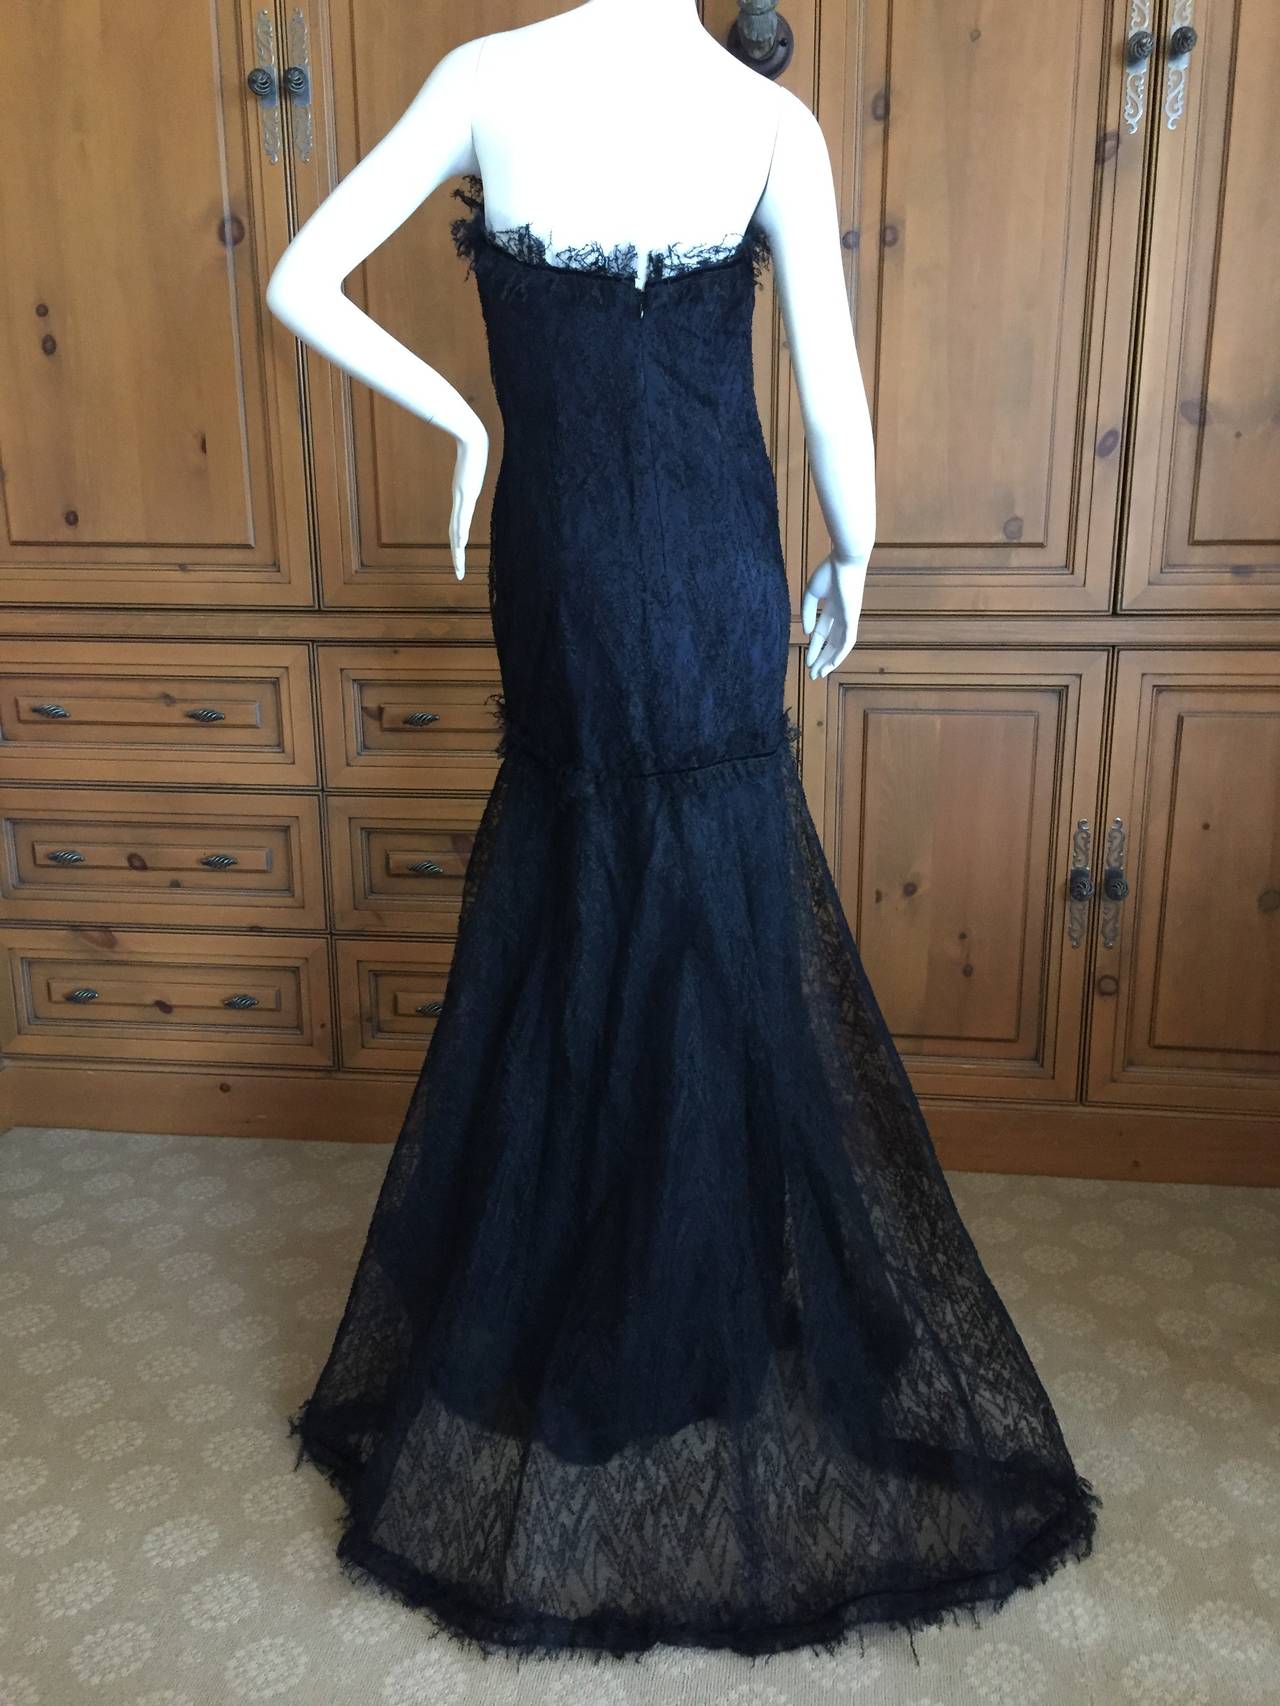 Exquisite lace gown from Carolina Herrera.
Navy blue under dress, over lace dress with fringe details.
Sz 12